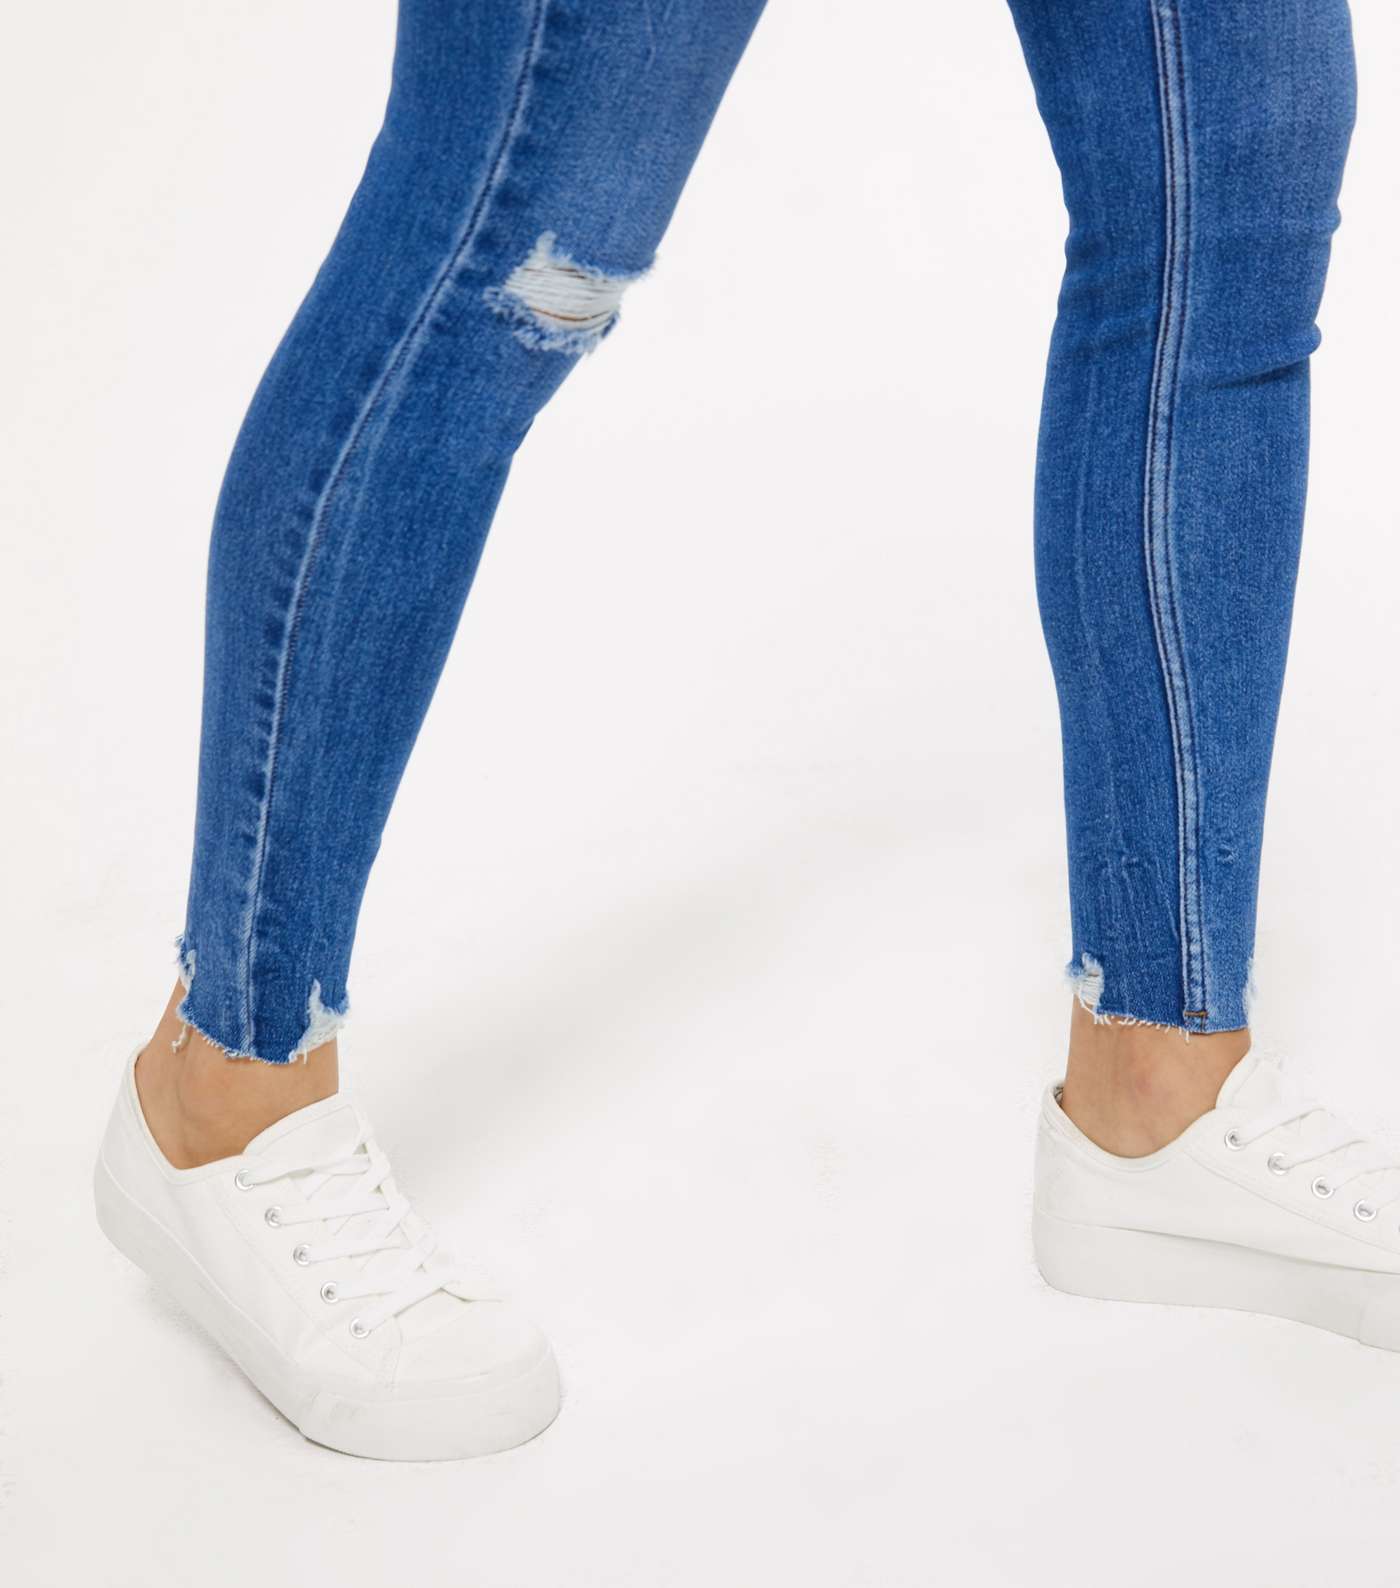 Bright Blue Ripped High Waist Hallie Super Skinny Jeans Image 4